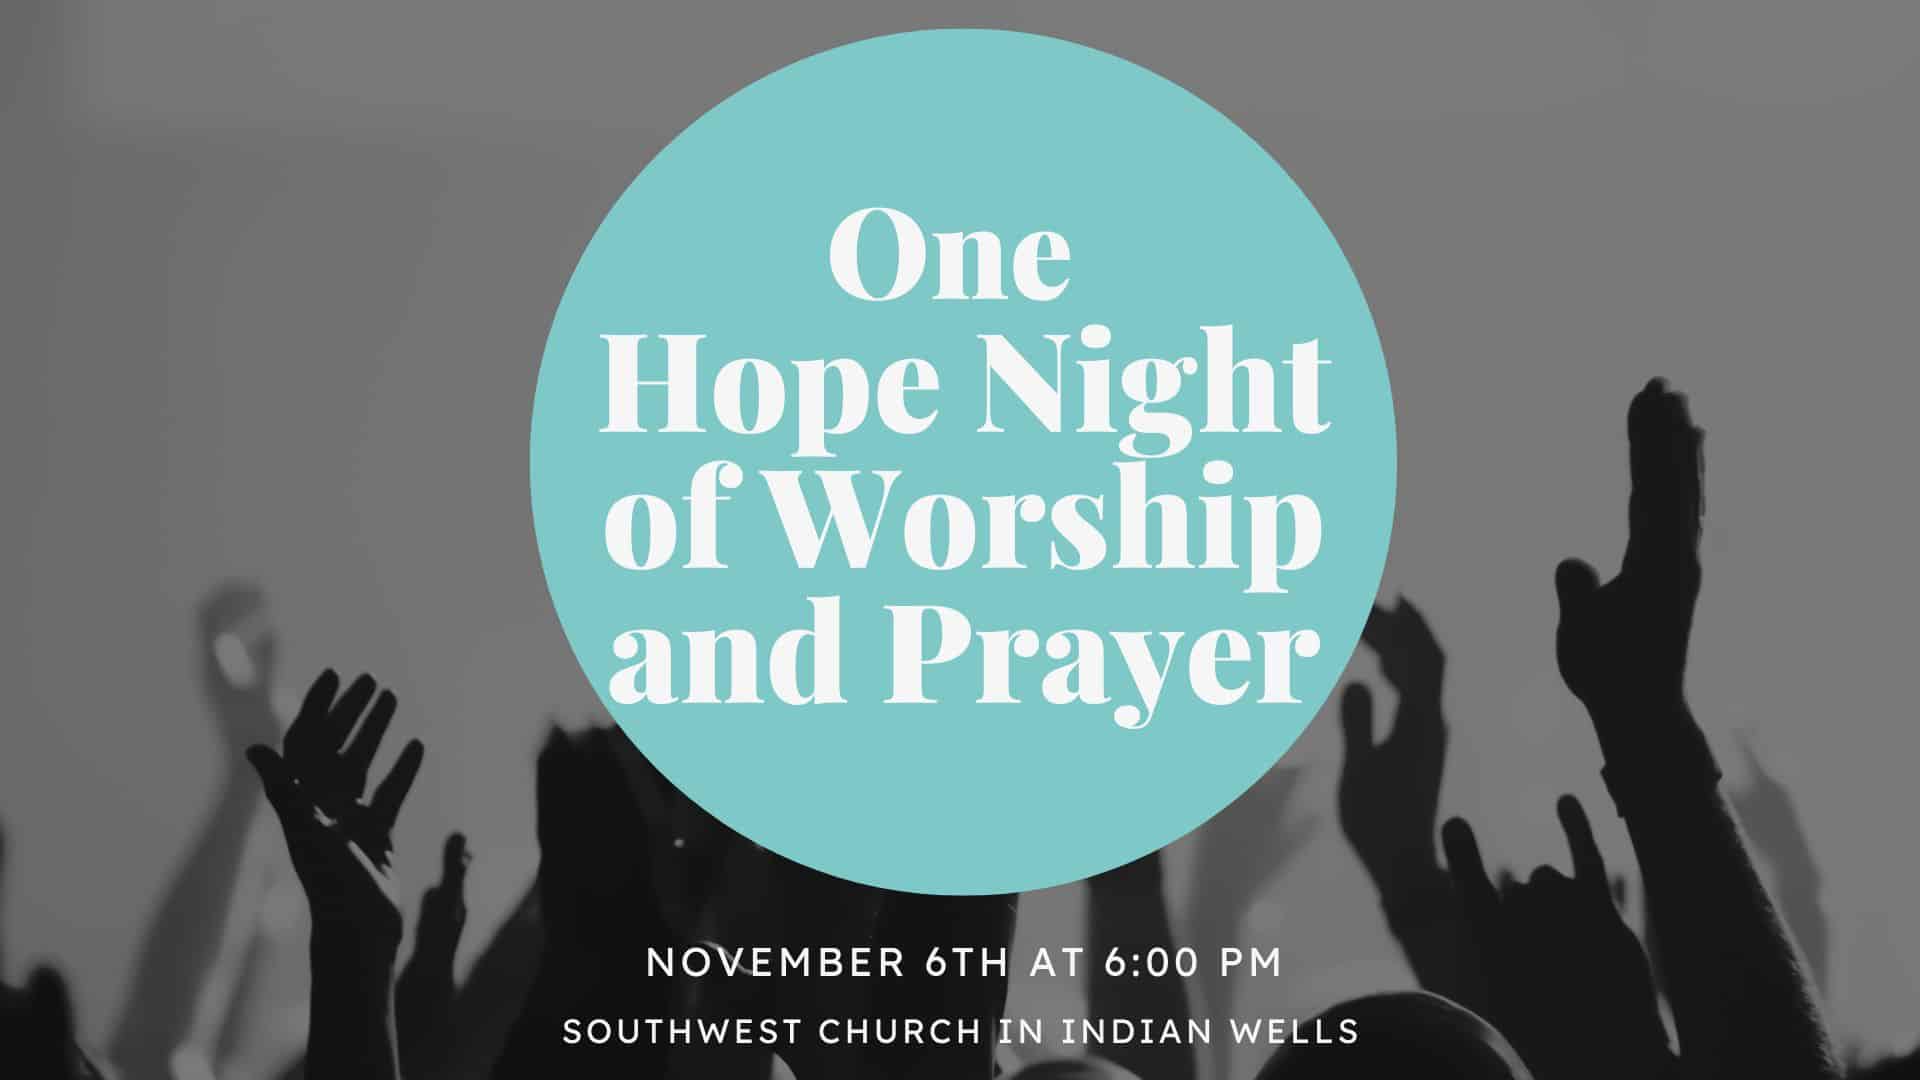 One Hope Night of Worship and Prayer November 6 at 6:00 PM at Southwest Church in Indian Wells